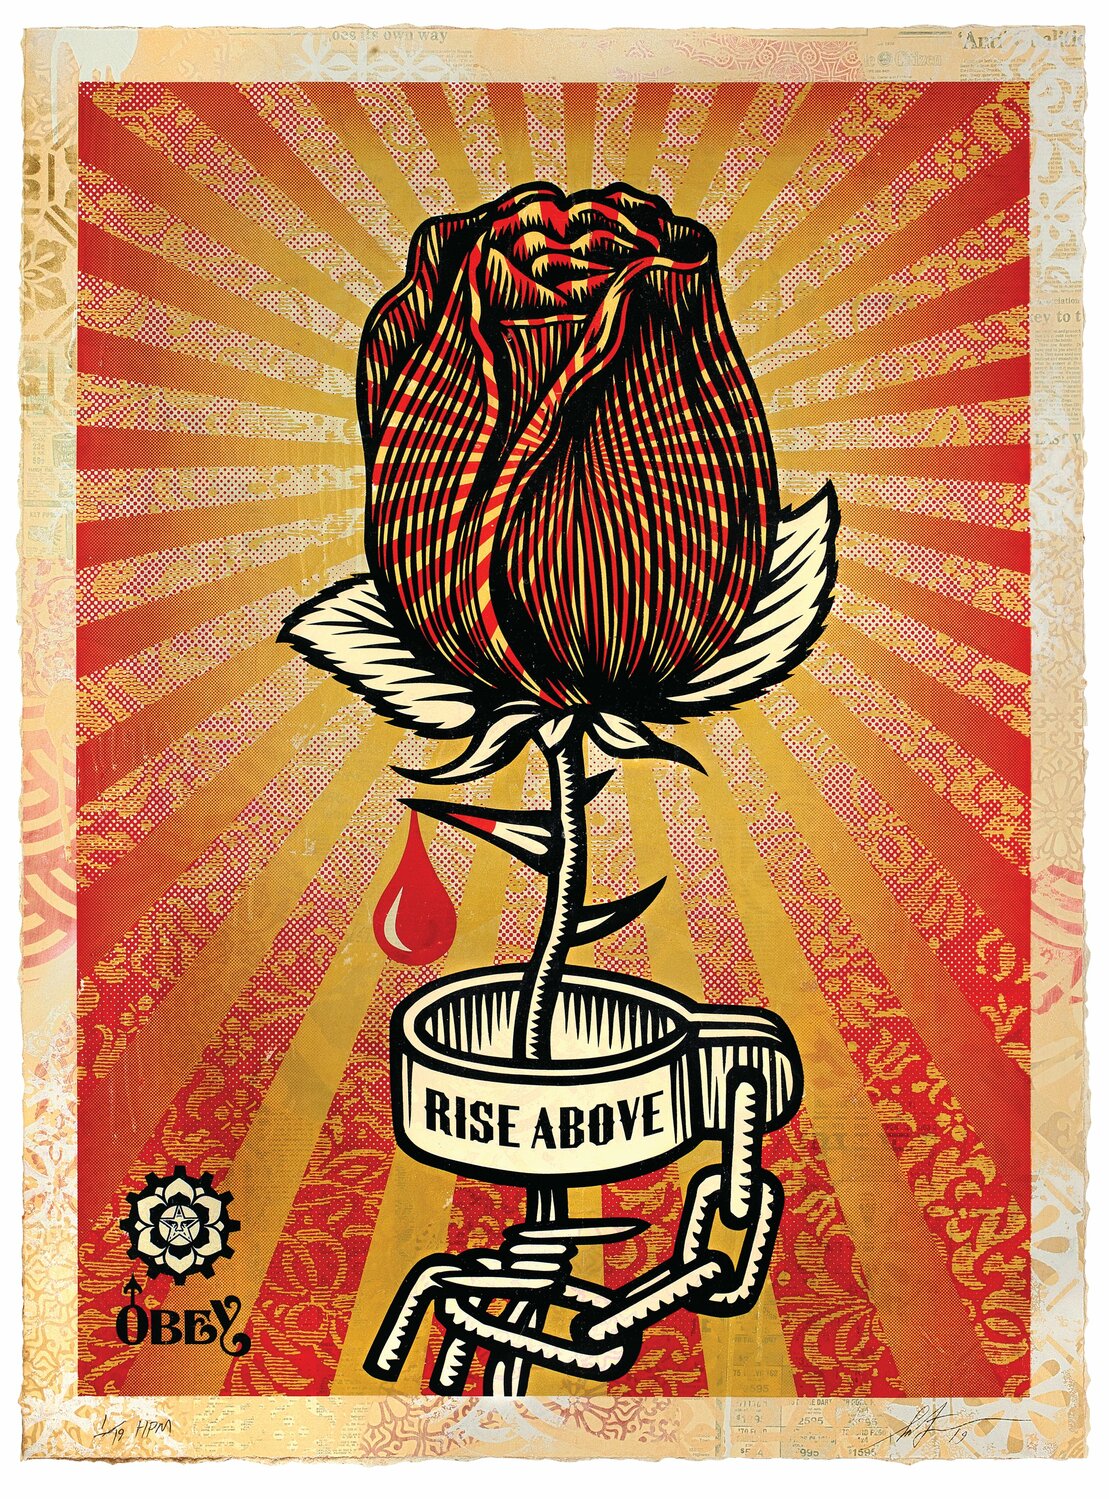 Shepard Fairey, “Rose Shackle,” 2019, silkscreen and mixed media collage on paper, HPM, 30 x 41 inches.